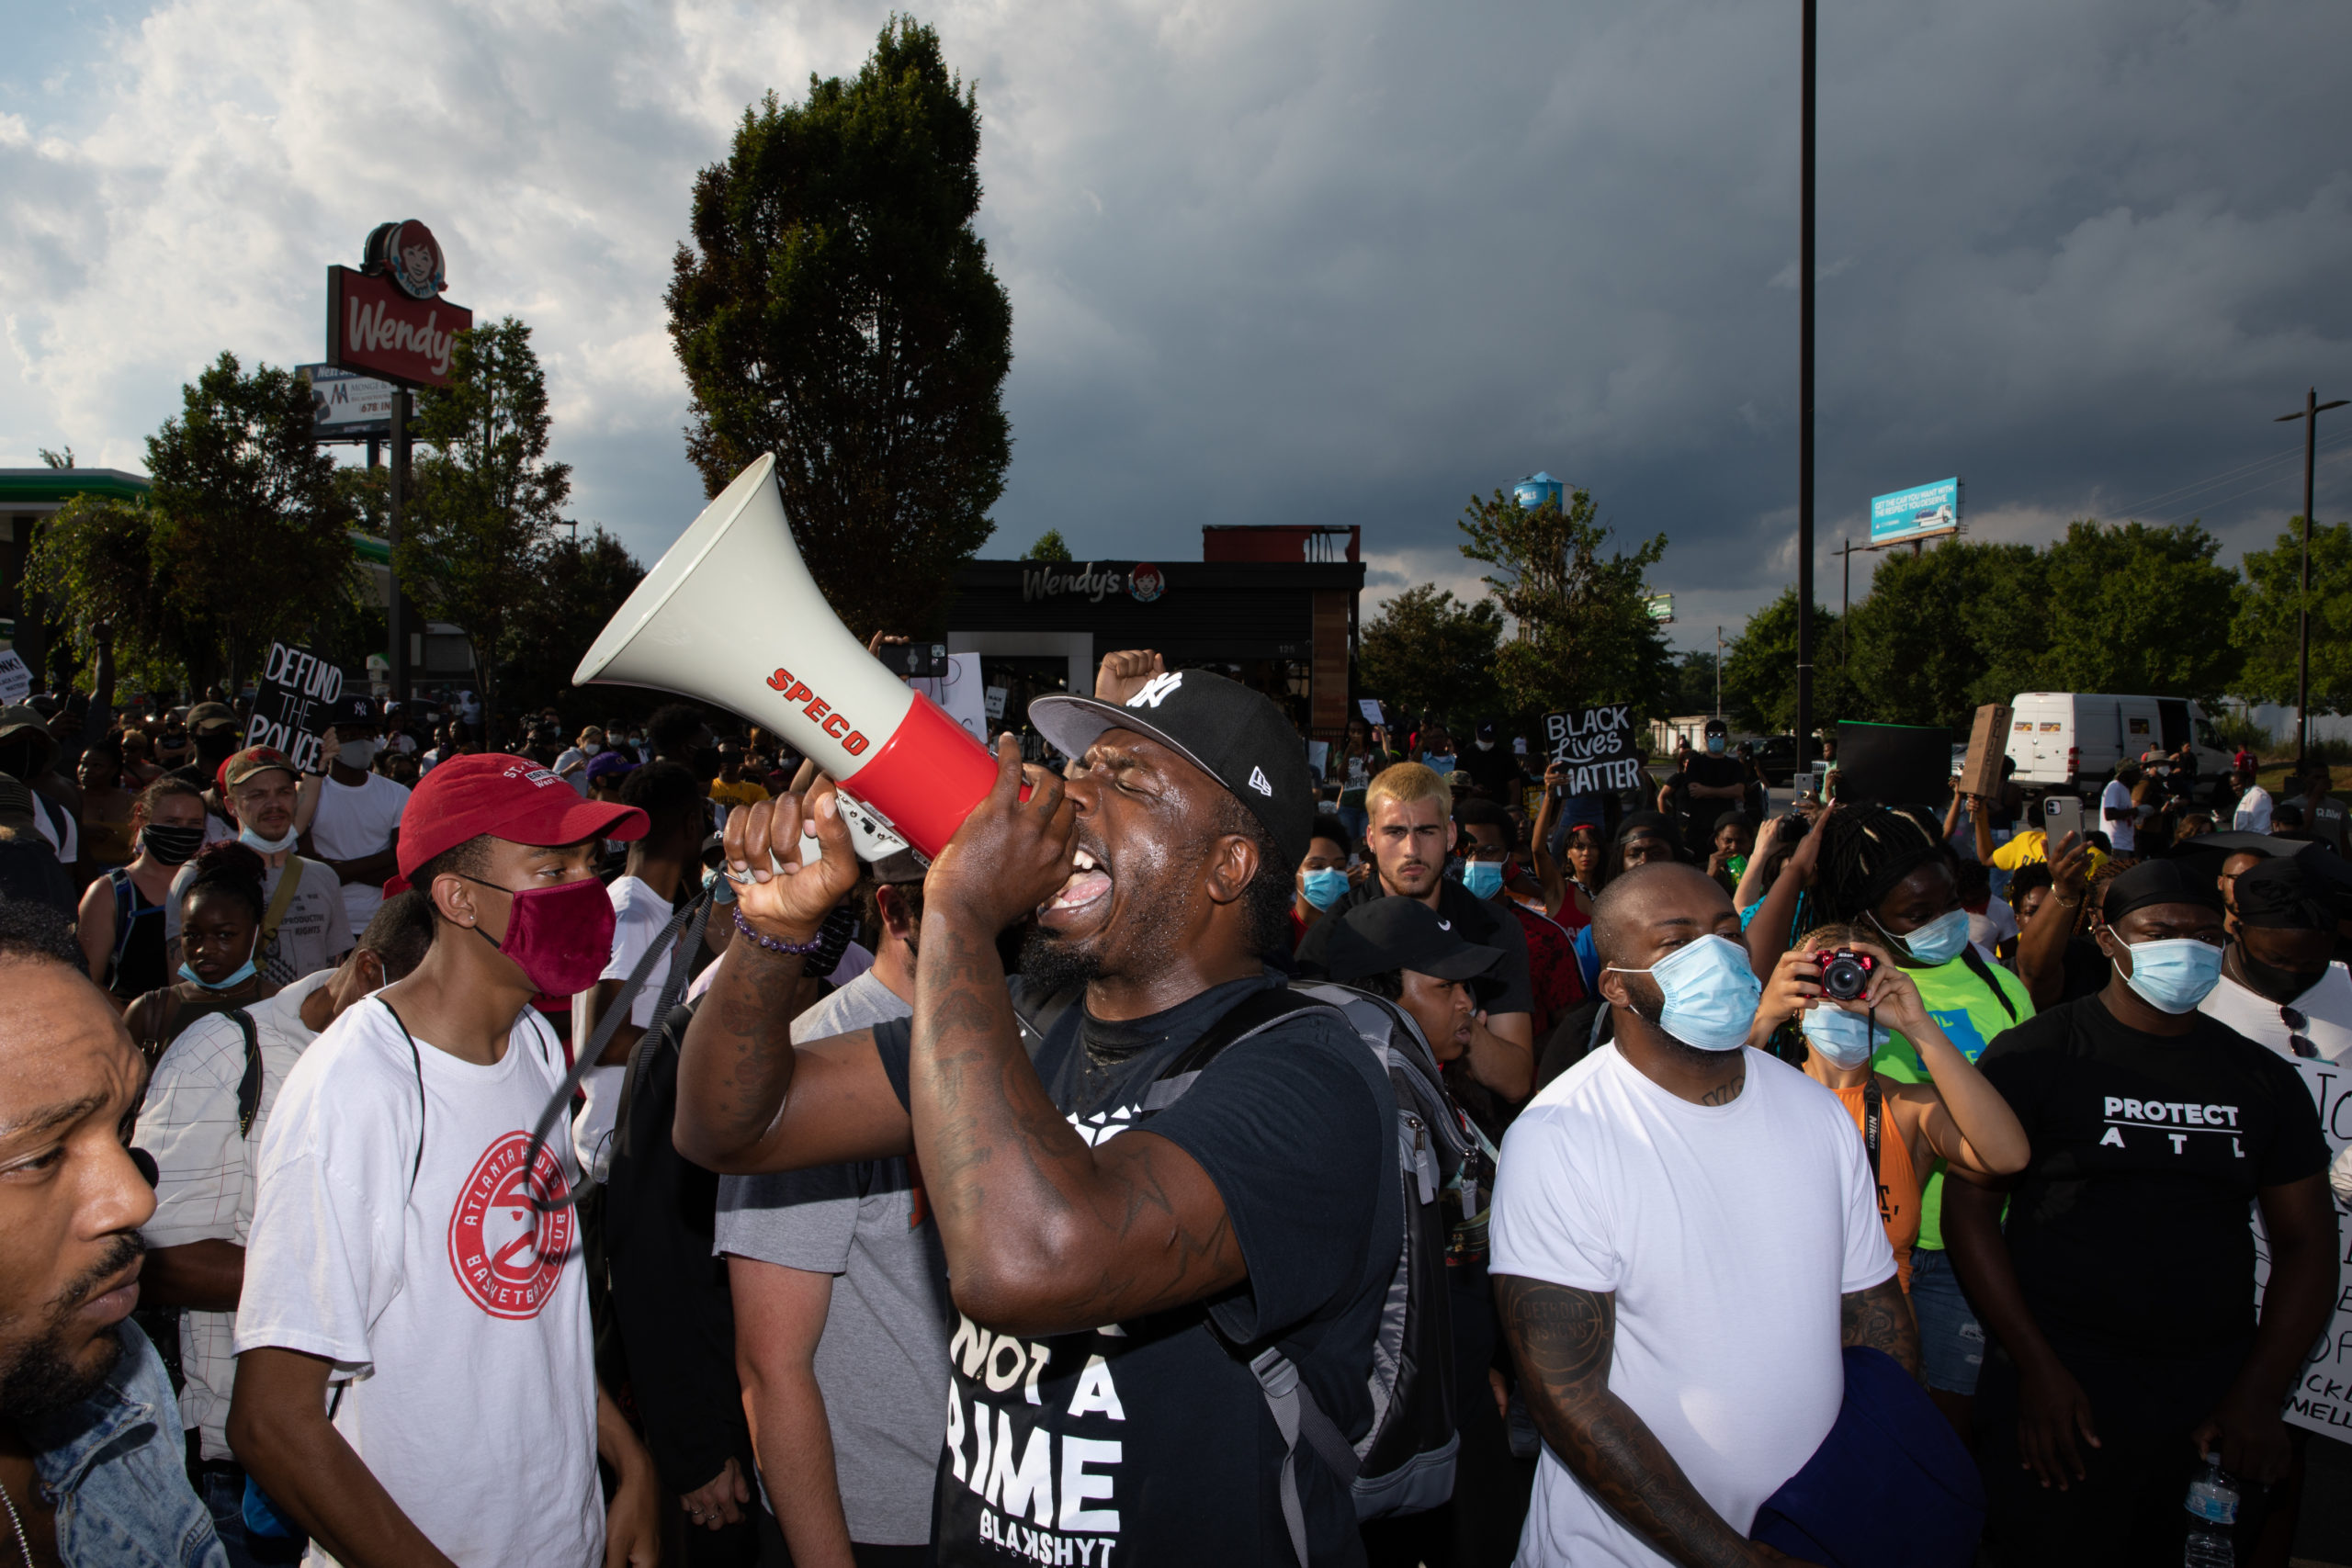 PROTEST. A man speaks into a bull-horn in front of the Wendy's restaurant set ablaze overnight on June 14, 2020 in Atlanta, Georgia. Rayshard Brooks, 27, was shot and killed yesterday by police in a struggle following a field sobriety test at the Wendy's. Photo by Dustin Chambers/Getty Images for Coda Story. 